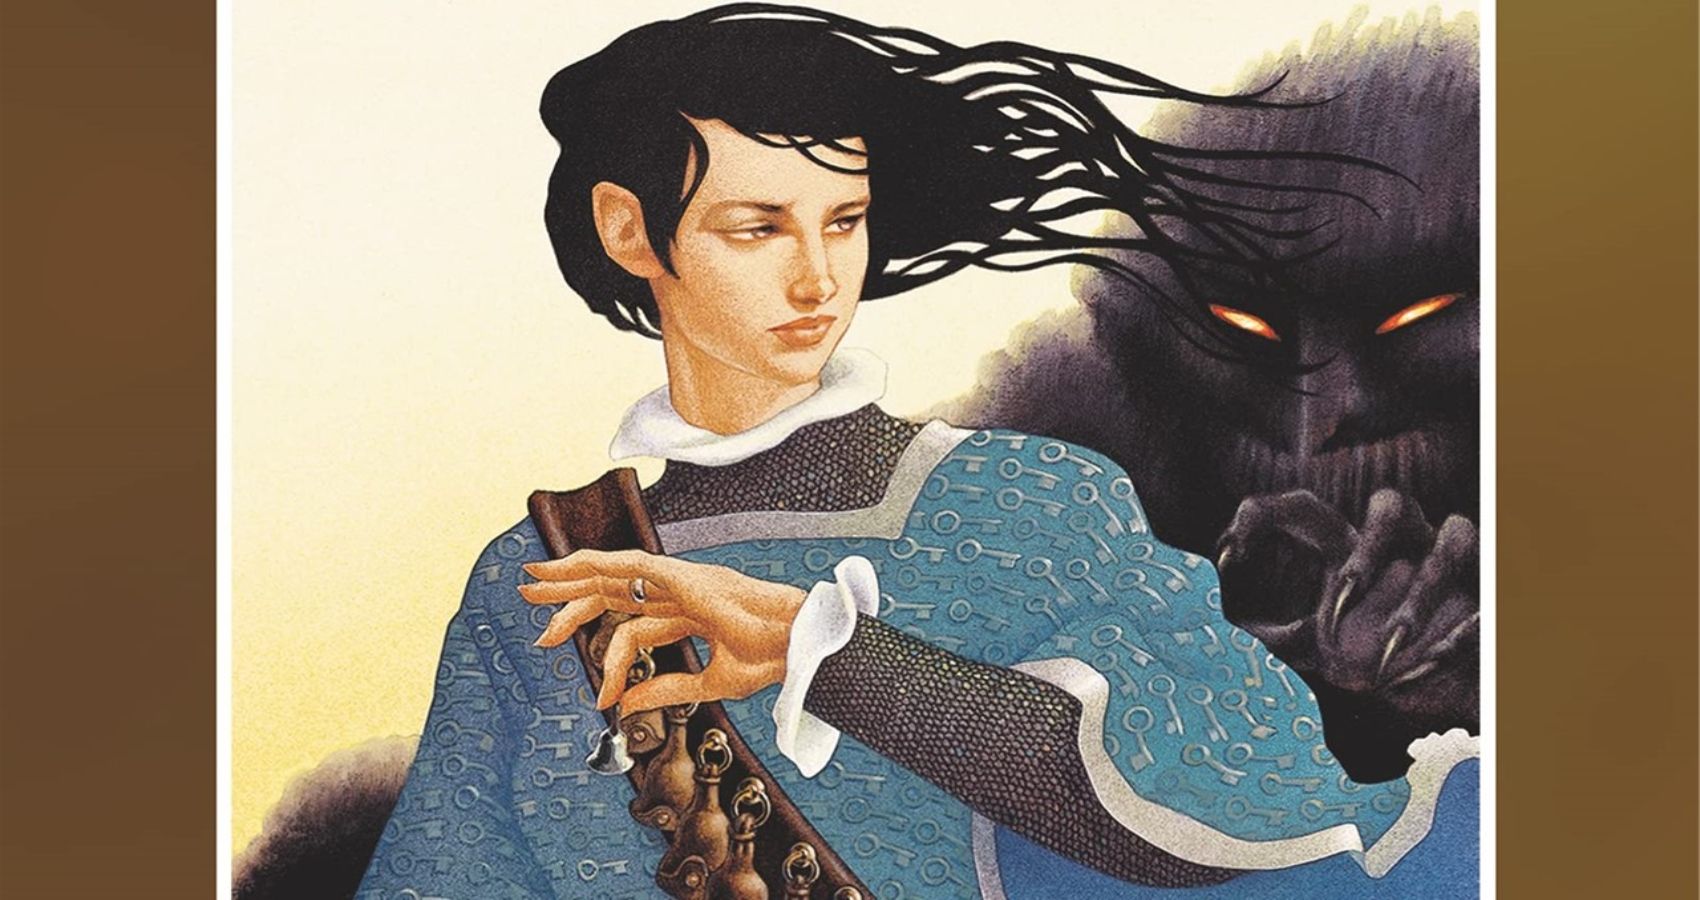 Why Garth Nix's Sabriel Should be Adapted into an Animated Movie